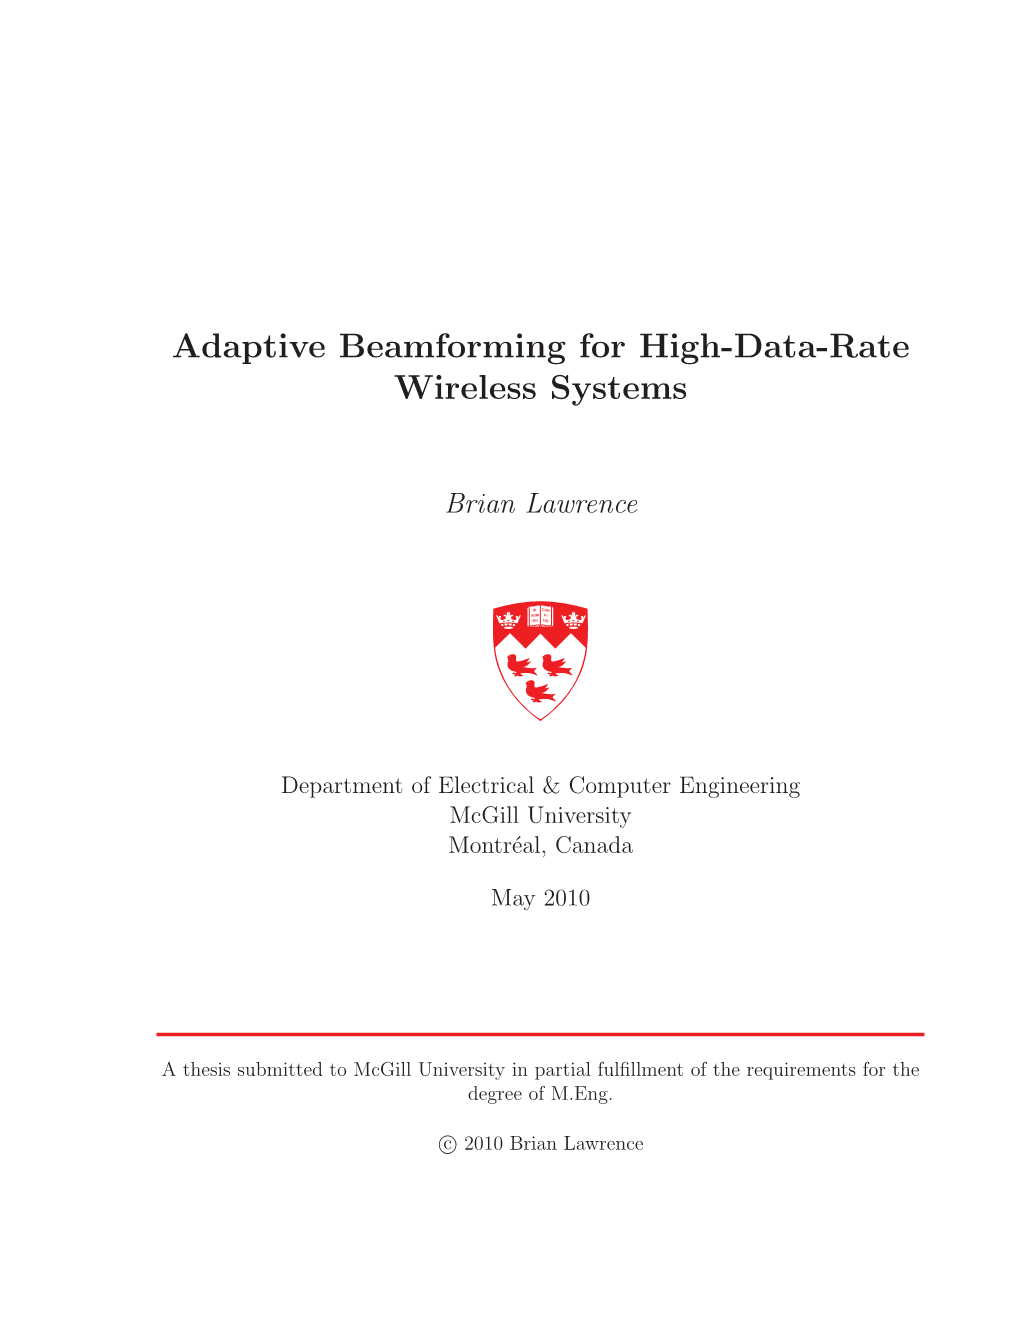 Adaptive Beamforming for High-Data-Rate Wireless Systems